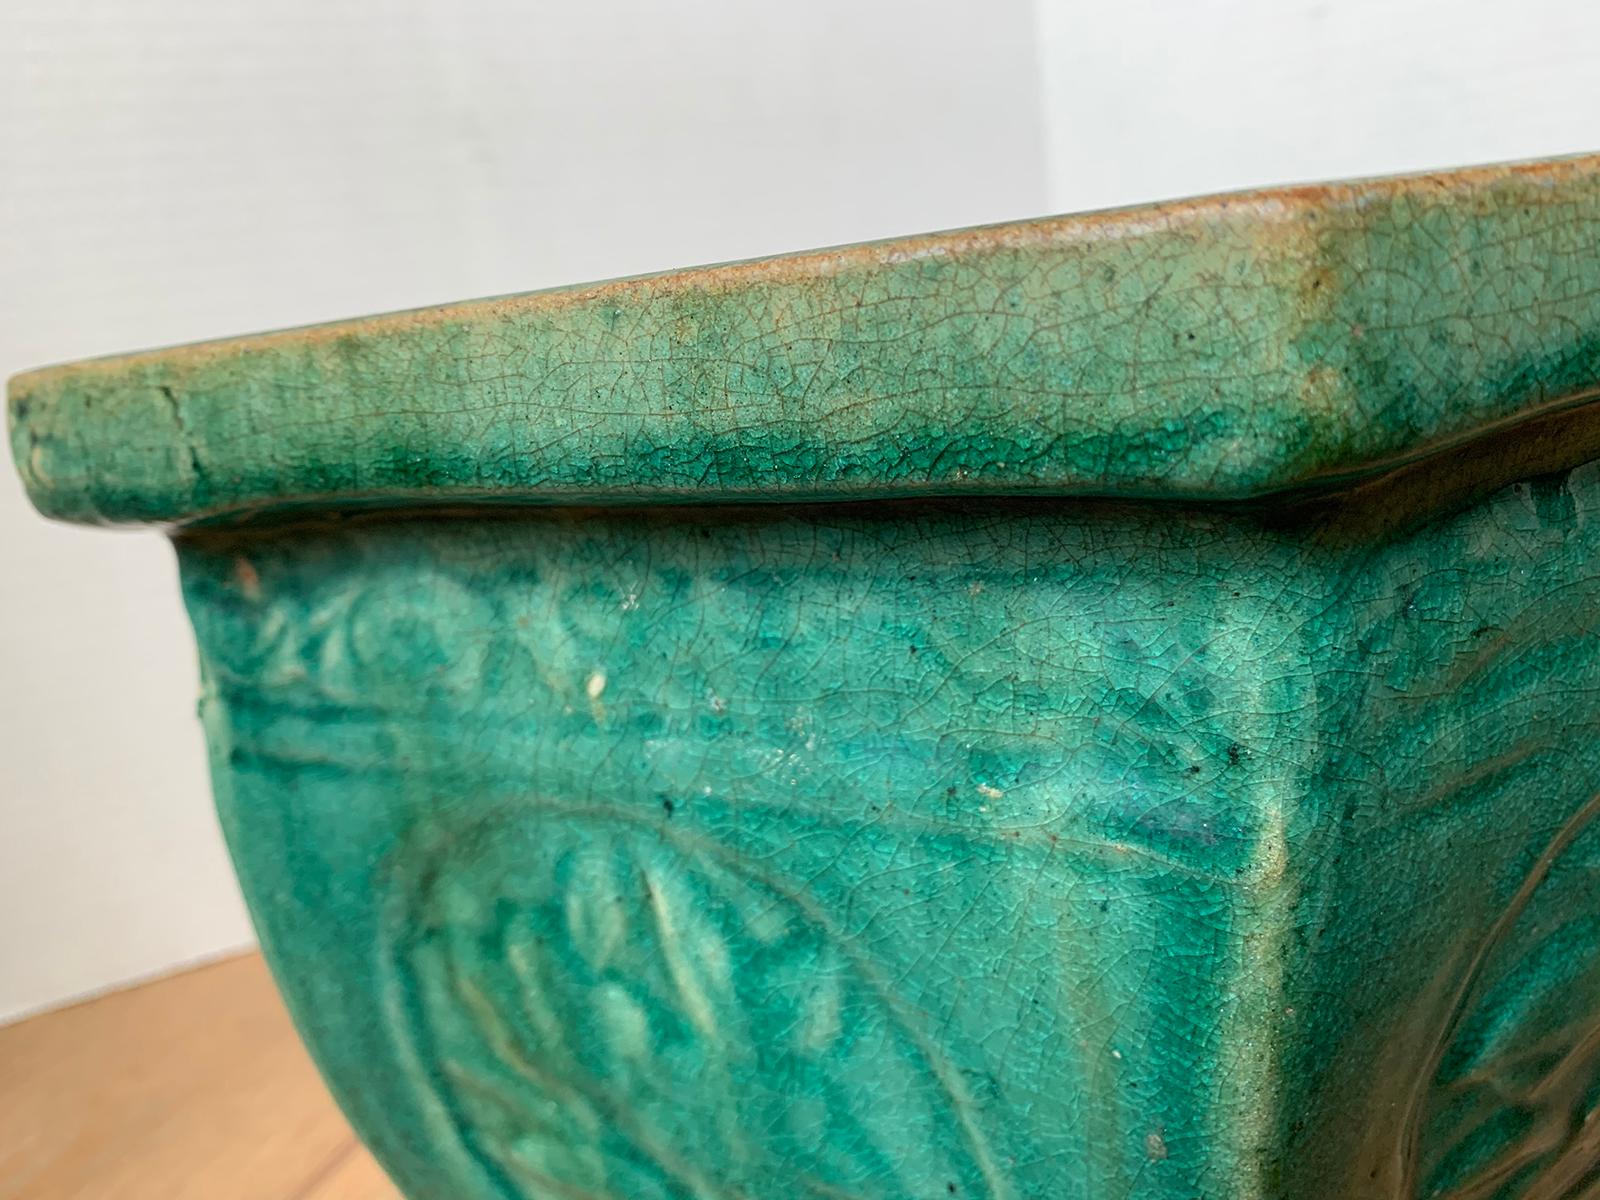 19th-20th Century Chinese Turquoise Blue Hexagonal Pottery Cachepot Planter In Good Condition For Sale In Atlanta, GA